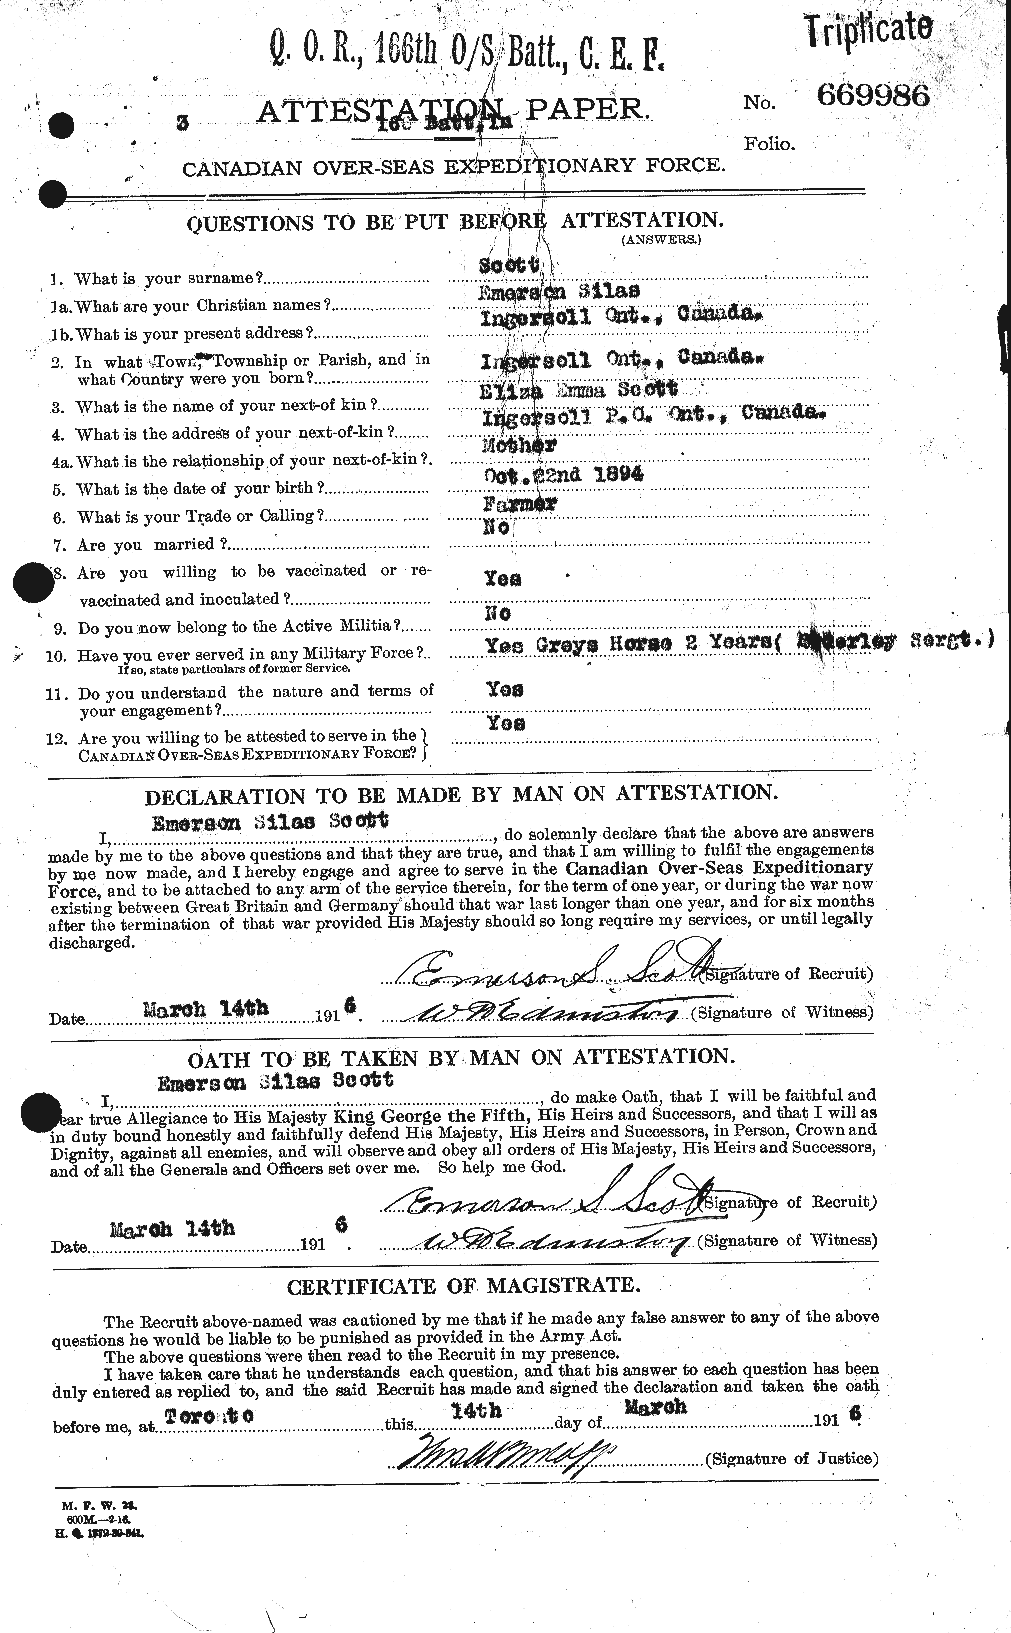 Personnel Records of the First World War - CEF 085029a